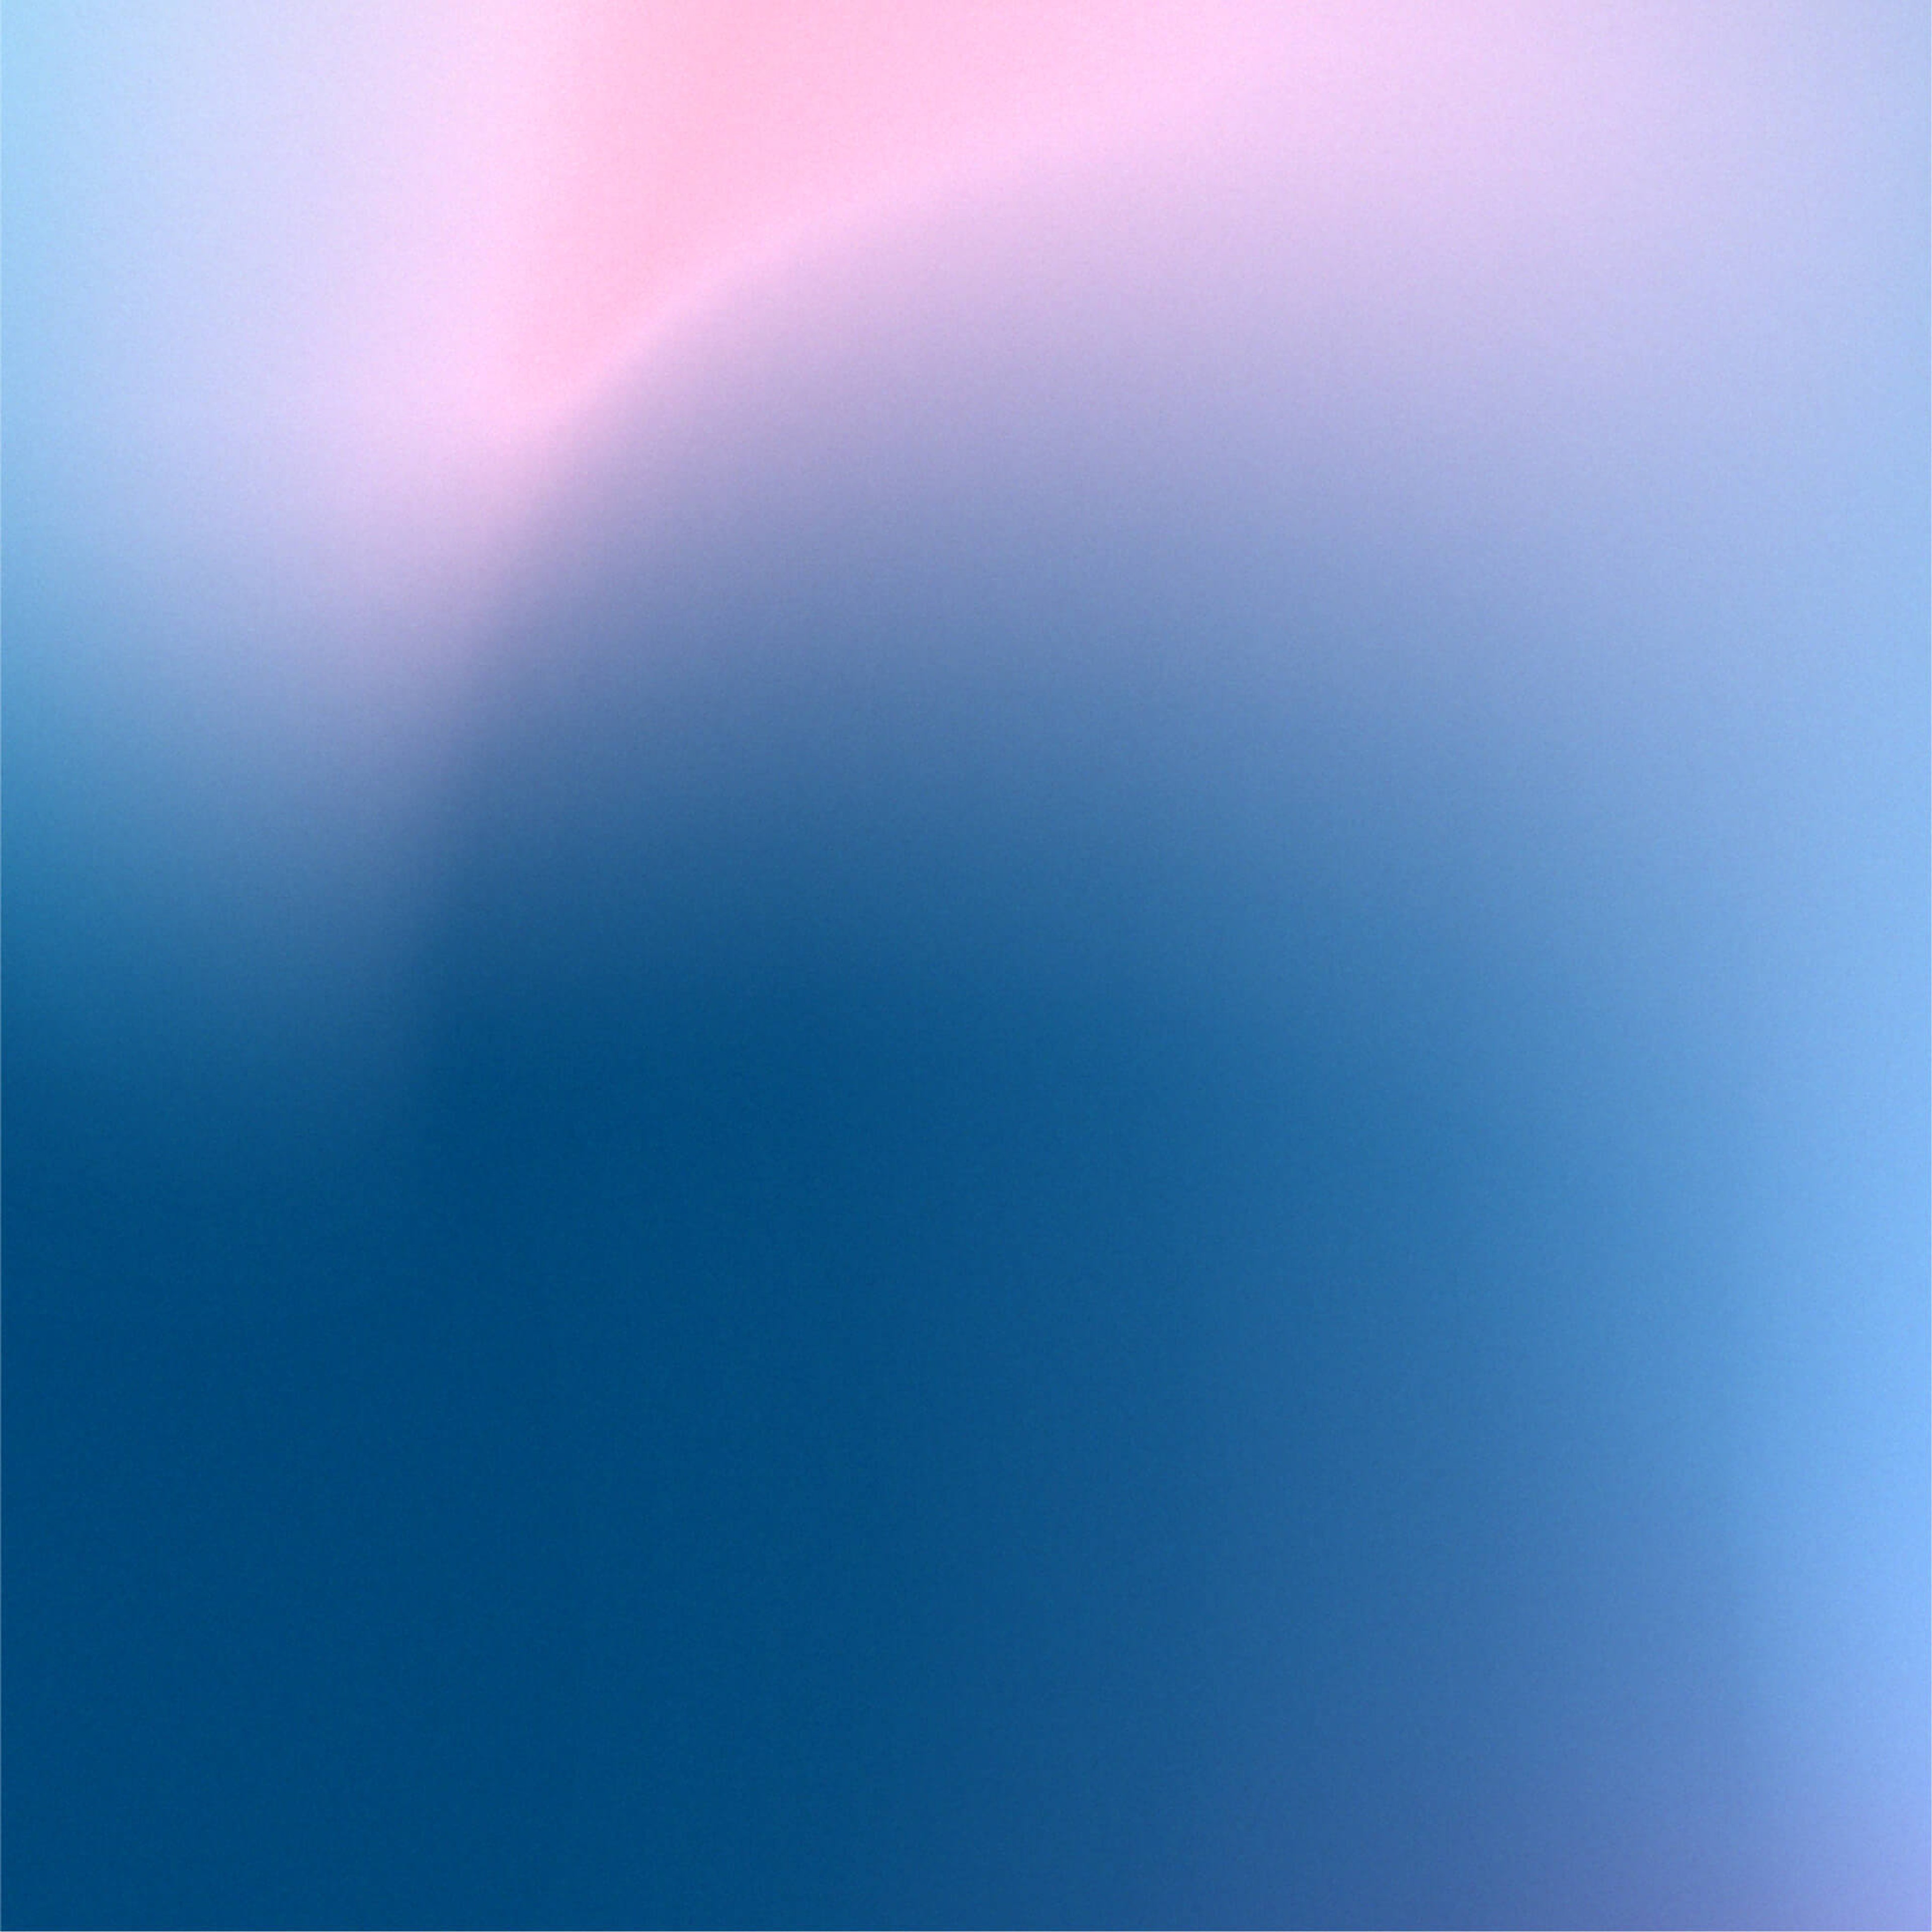 A colorful gradient of blue and pink.